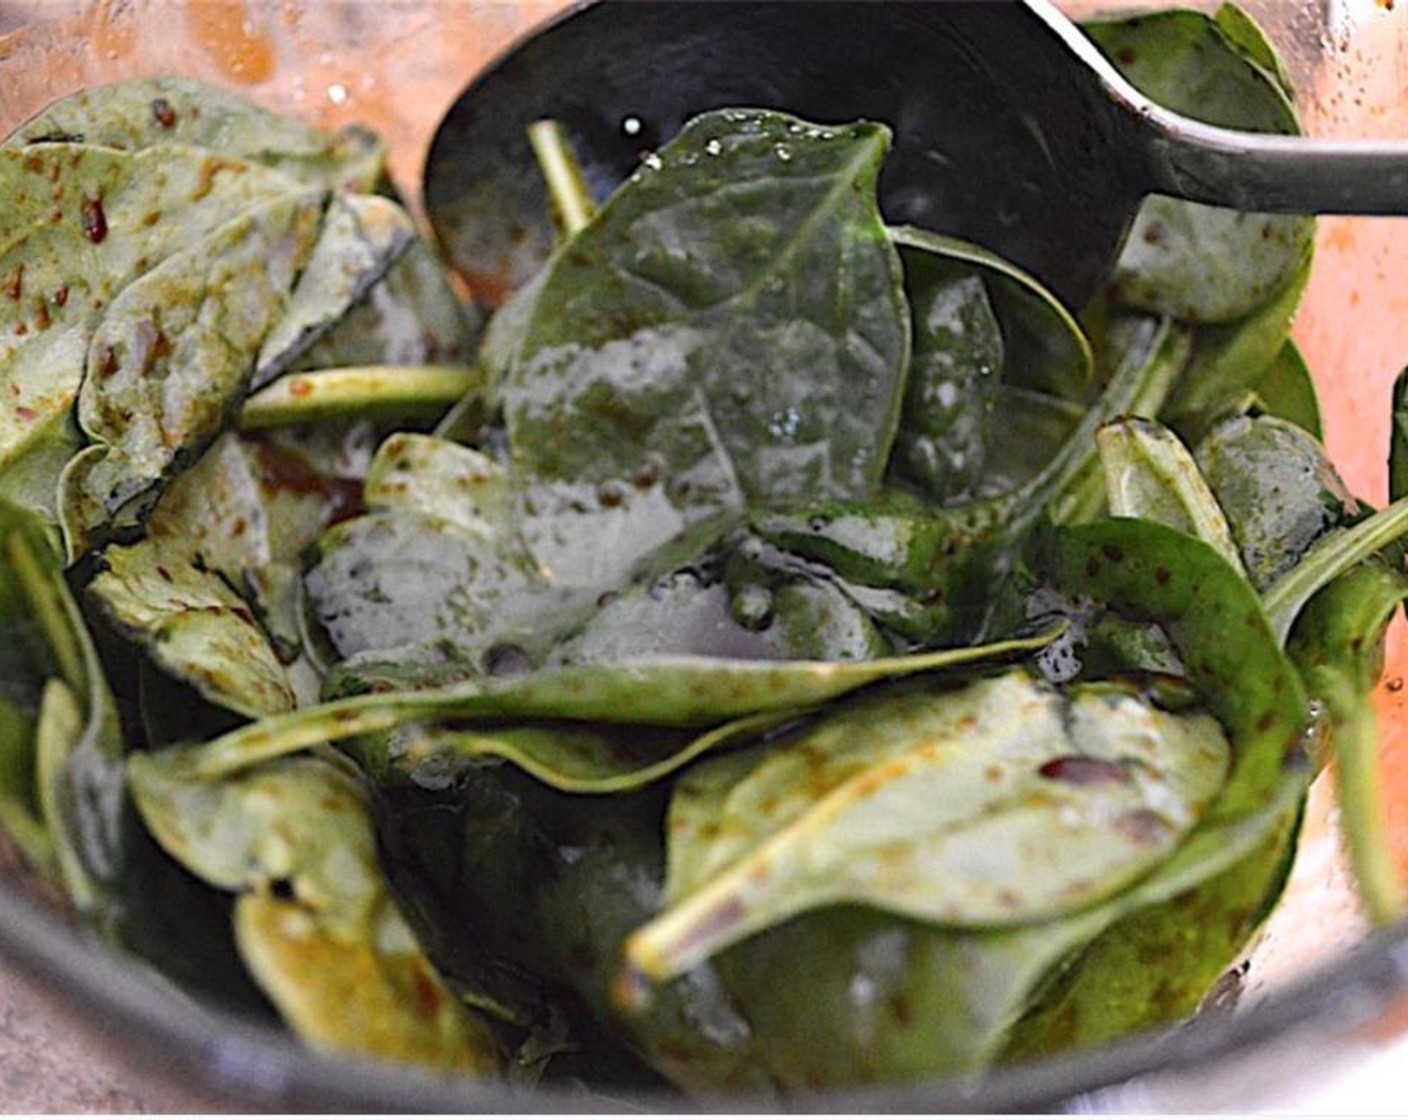 step 2 Take the Fresh Baby Spinach (1 cup) and toss with Olive Oil (1 Tbsp) and Balsamic Vinegar (1 Tbsp). Set aside.